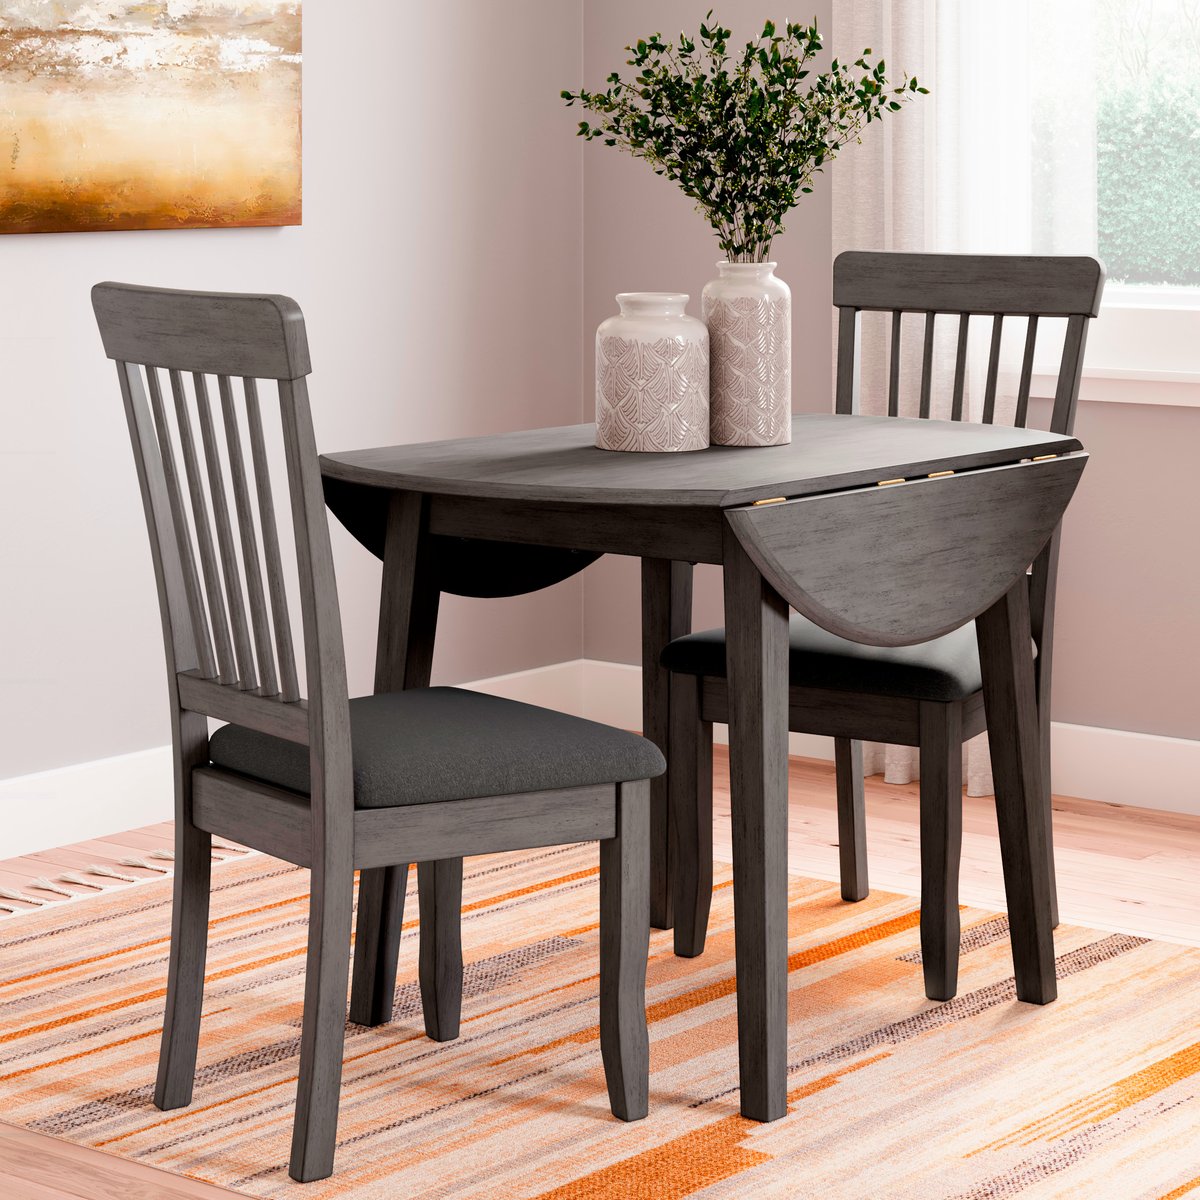 New double drop leaf table & 2 chairs only $449 or table & 6 chairs only $649! See it today in our Bend or Redmond stores!
#dining #diningset #diningroom #diningroomfurniture #furniture #furniturestore #bendoregon #redmondoregon #centraloregon #oregon